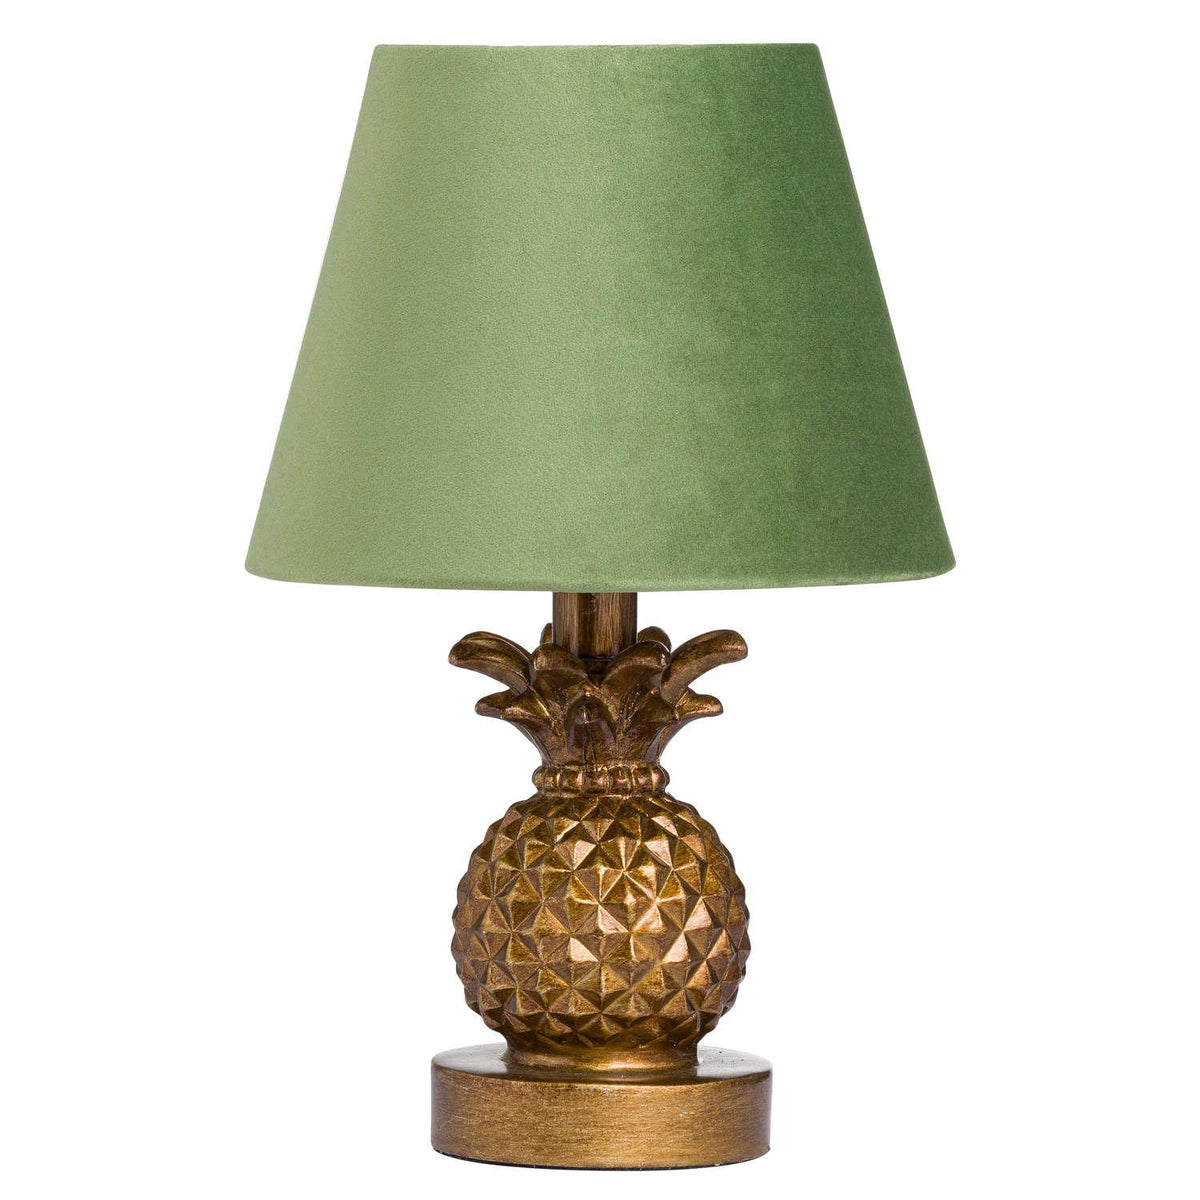 Antique Gold Pineapple Lamp With Artichoke Green VelvetShade - Vookoo Lifestyle